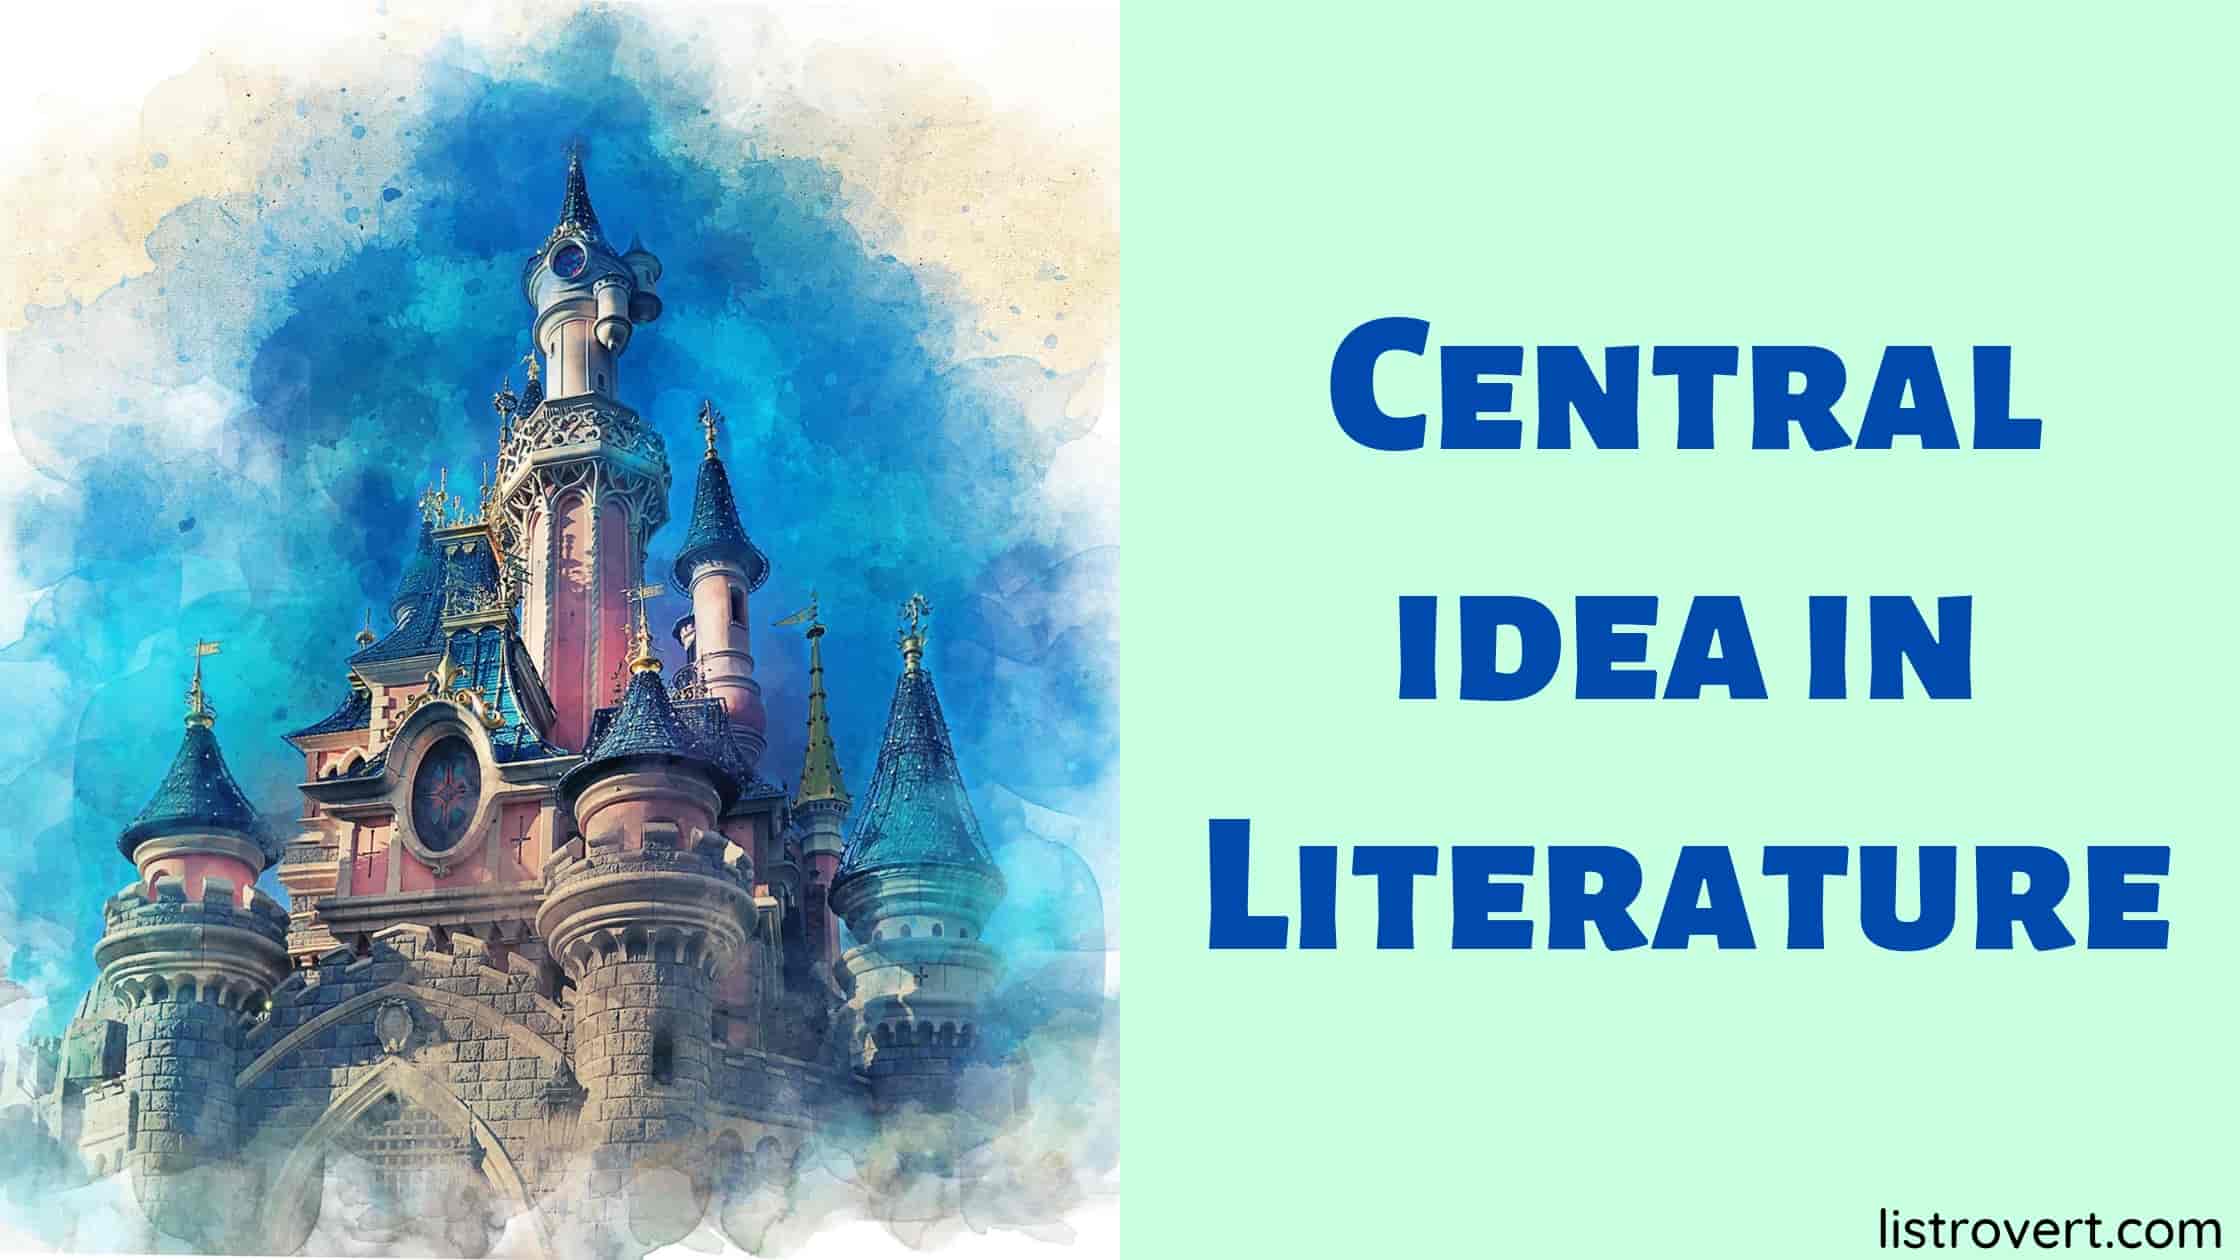 Central idea meaning in Hindi in literature